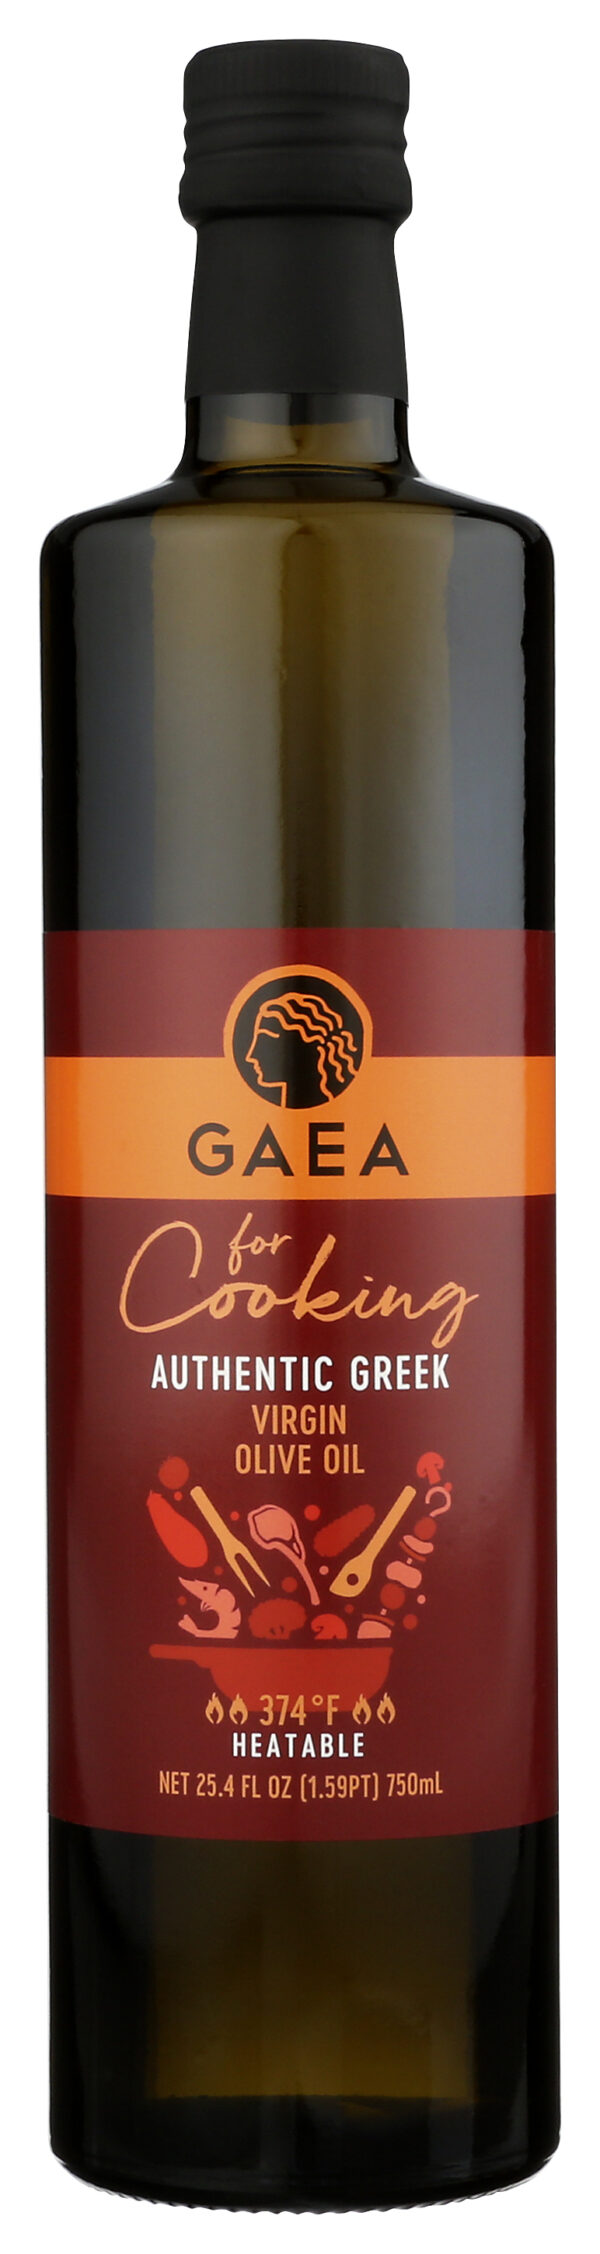 Authentic Greek Virgin Olive Oil for Cooking